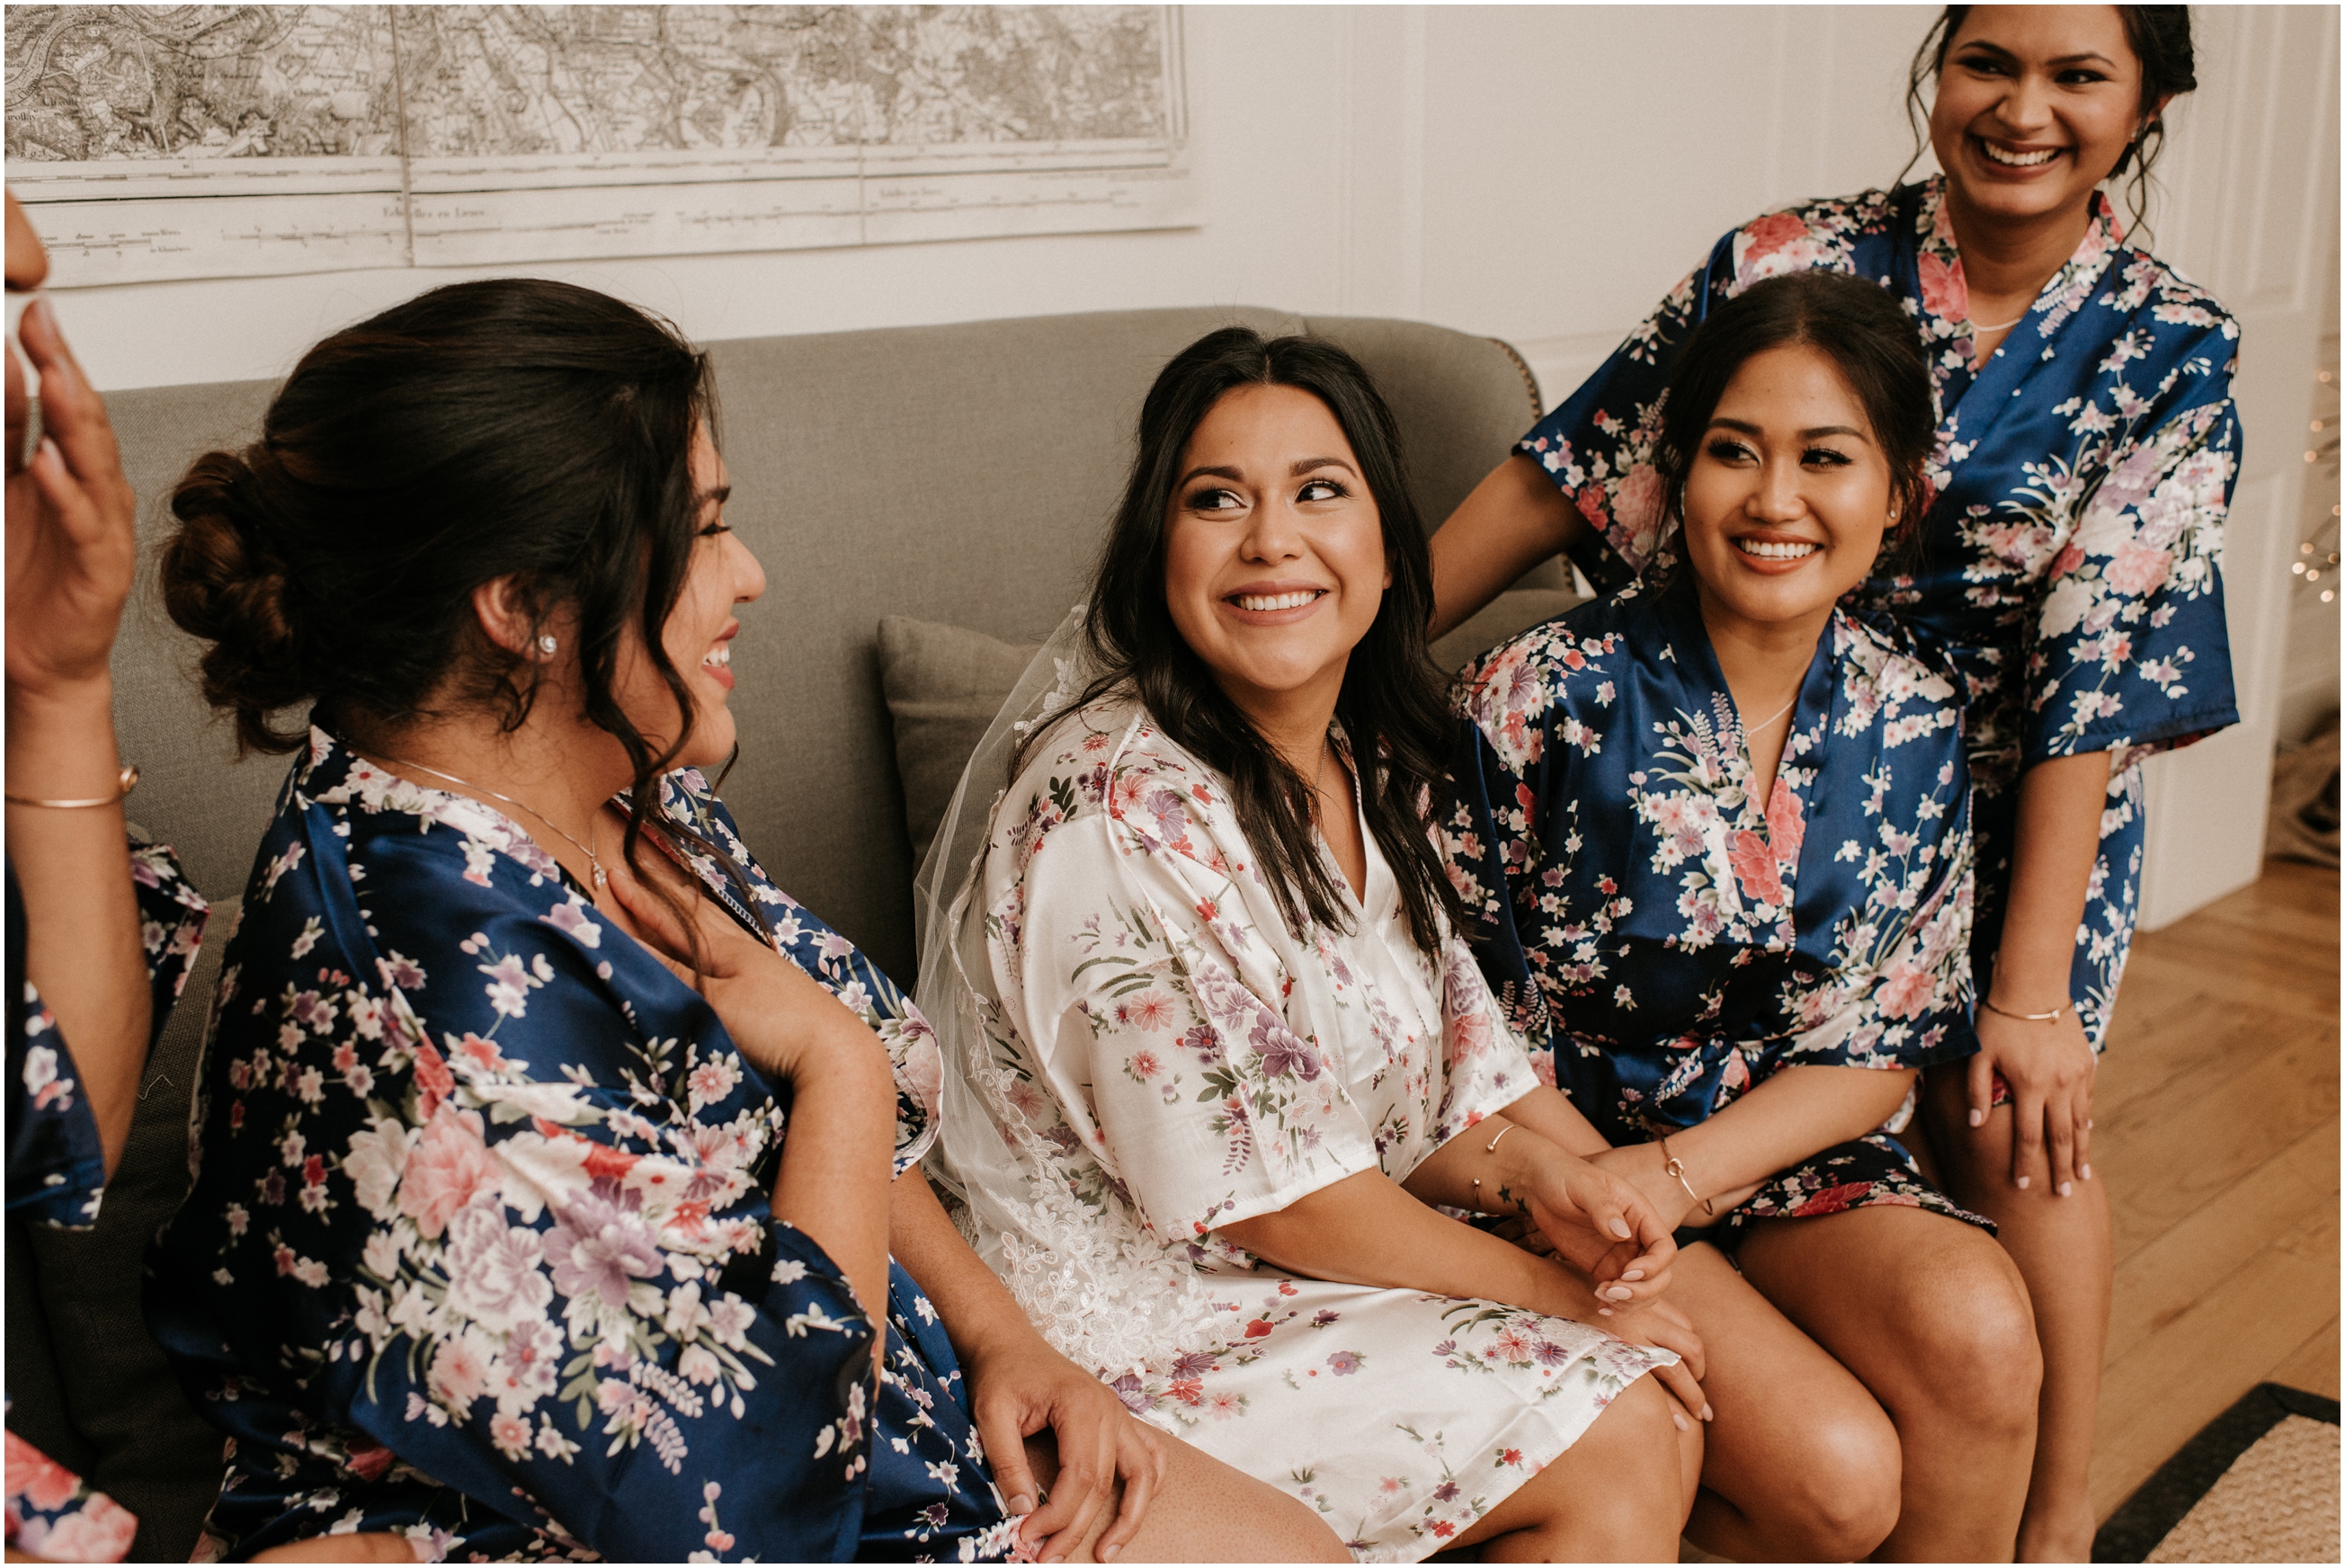 bridesmaid's in matching robes laughing together